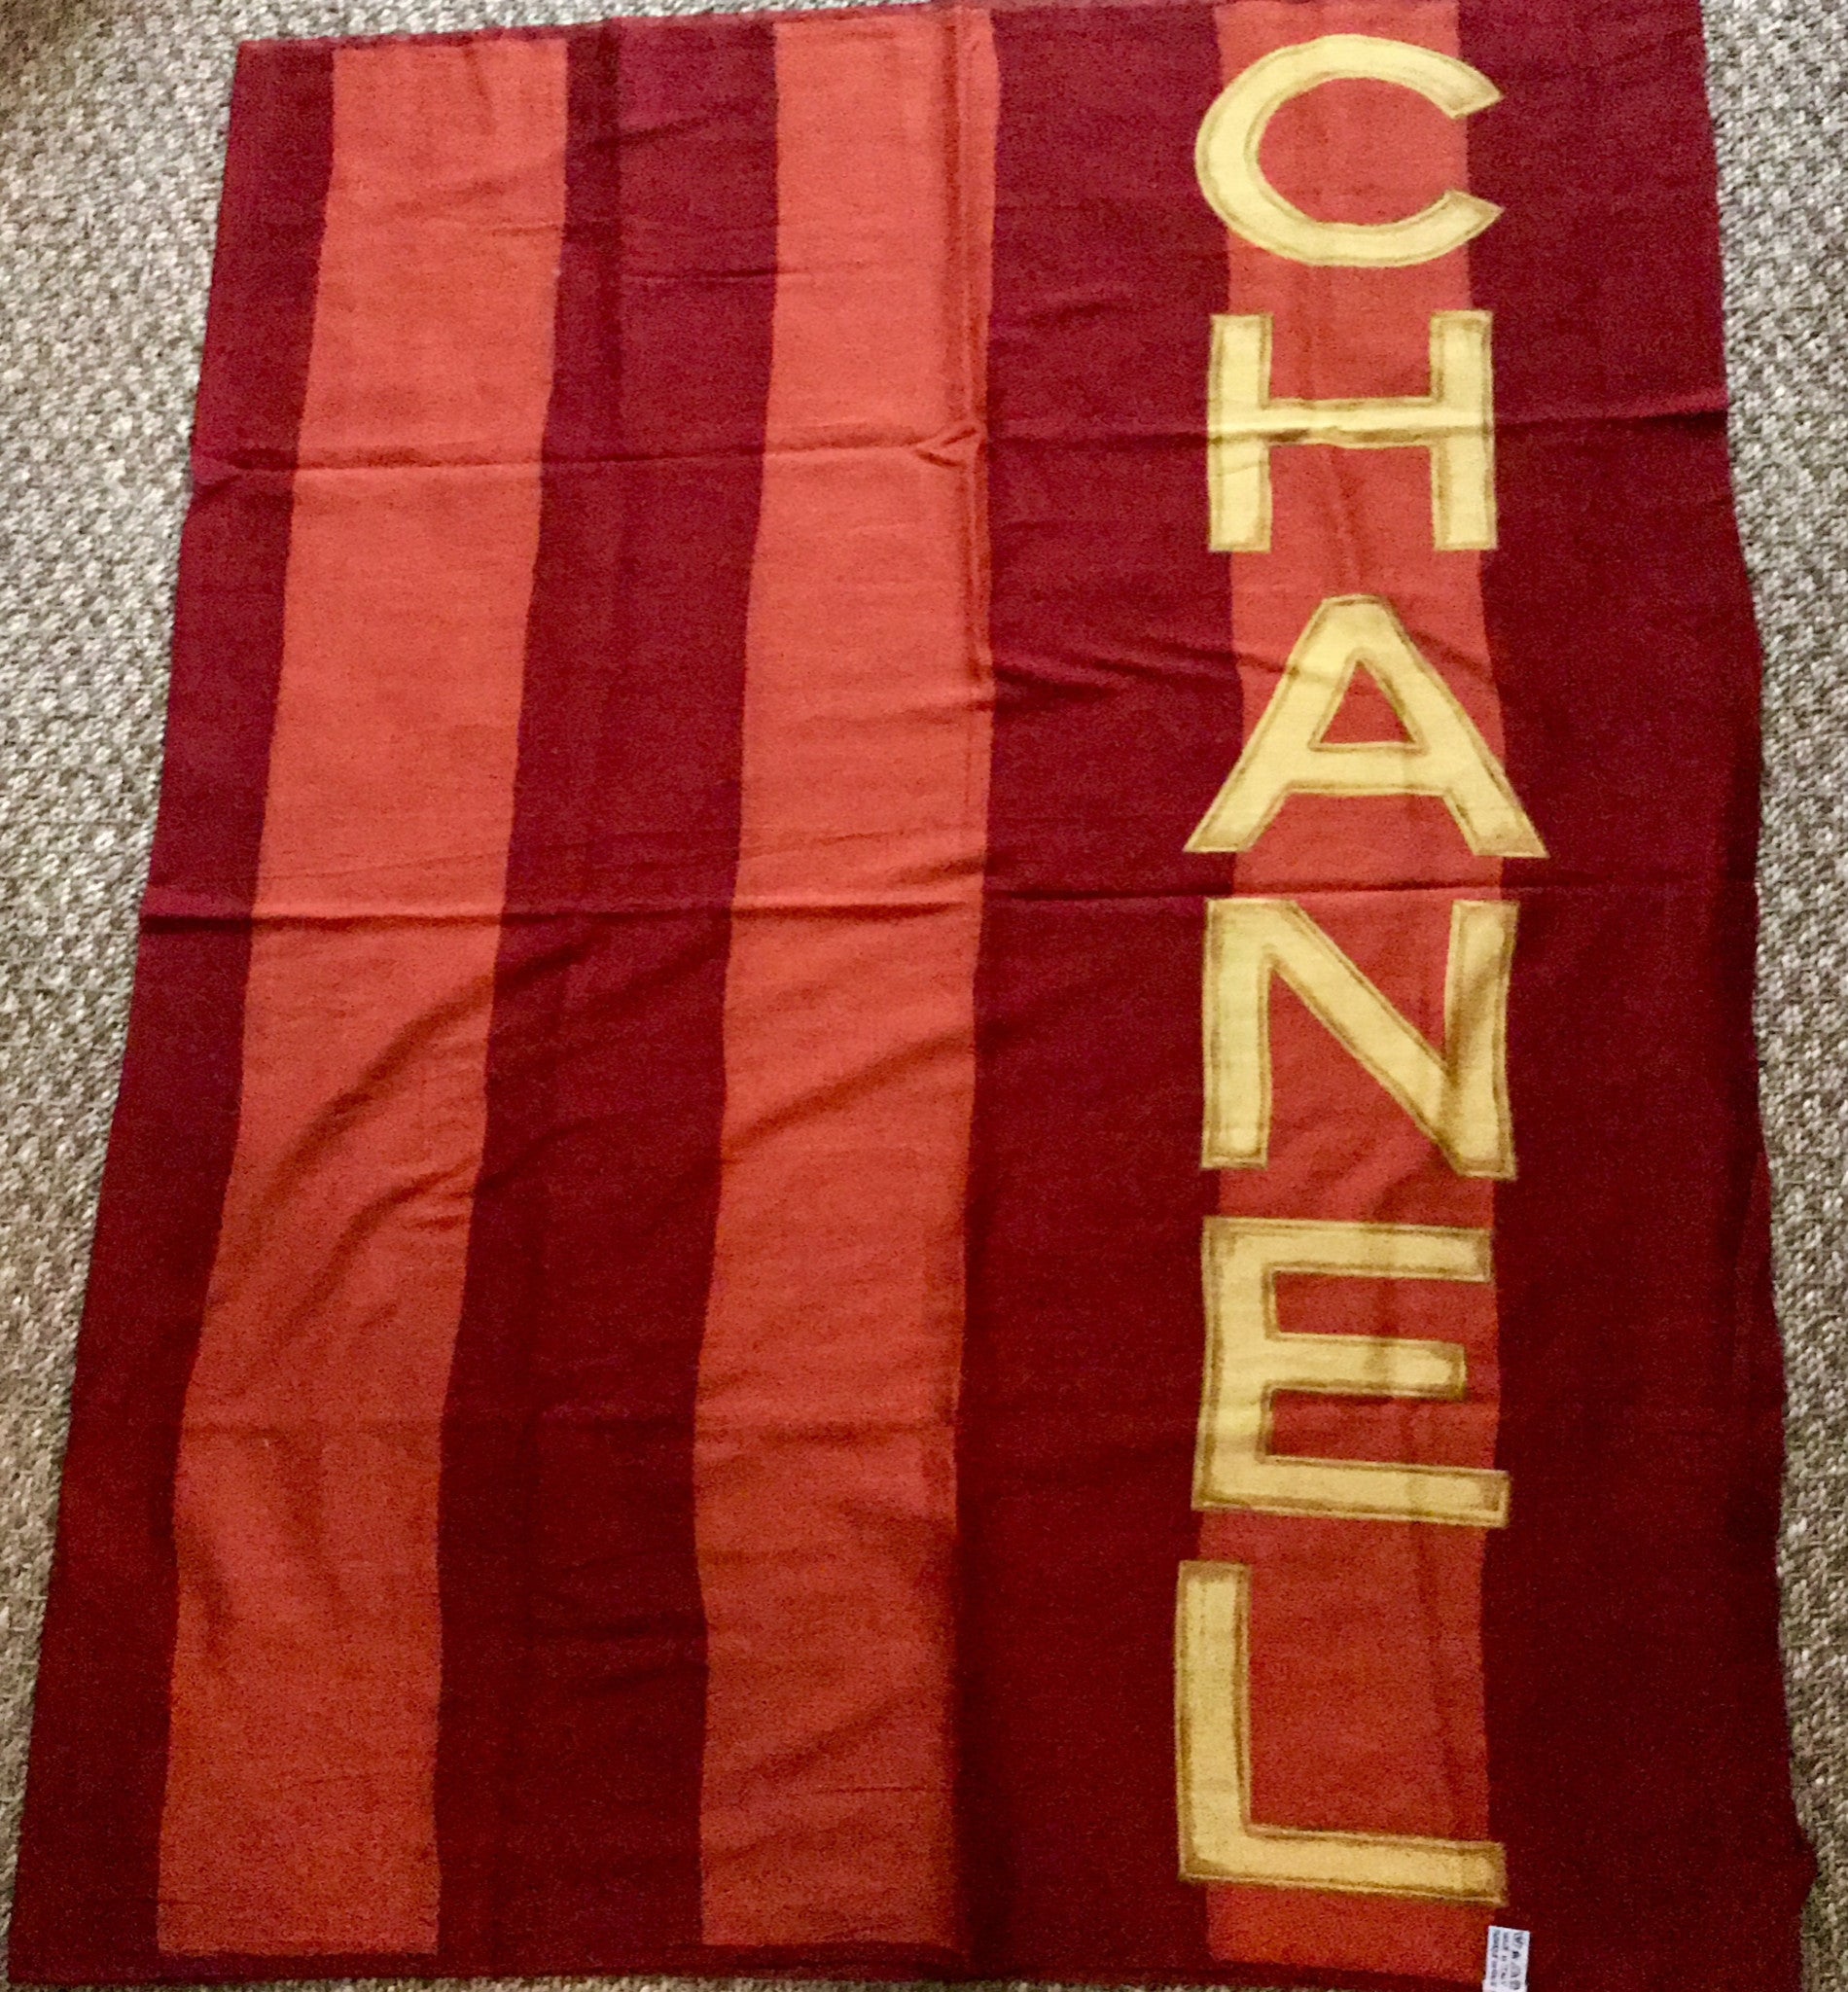 Chanel Pareo in Burgundy/Orange with Yellow Lettering